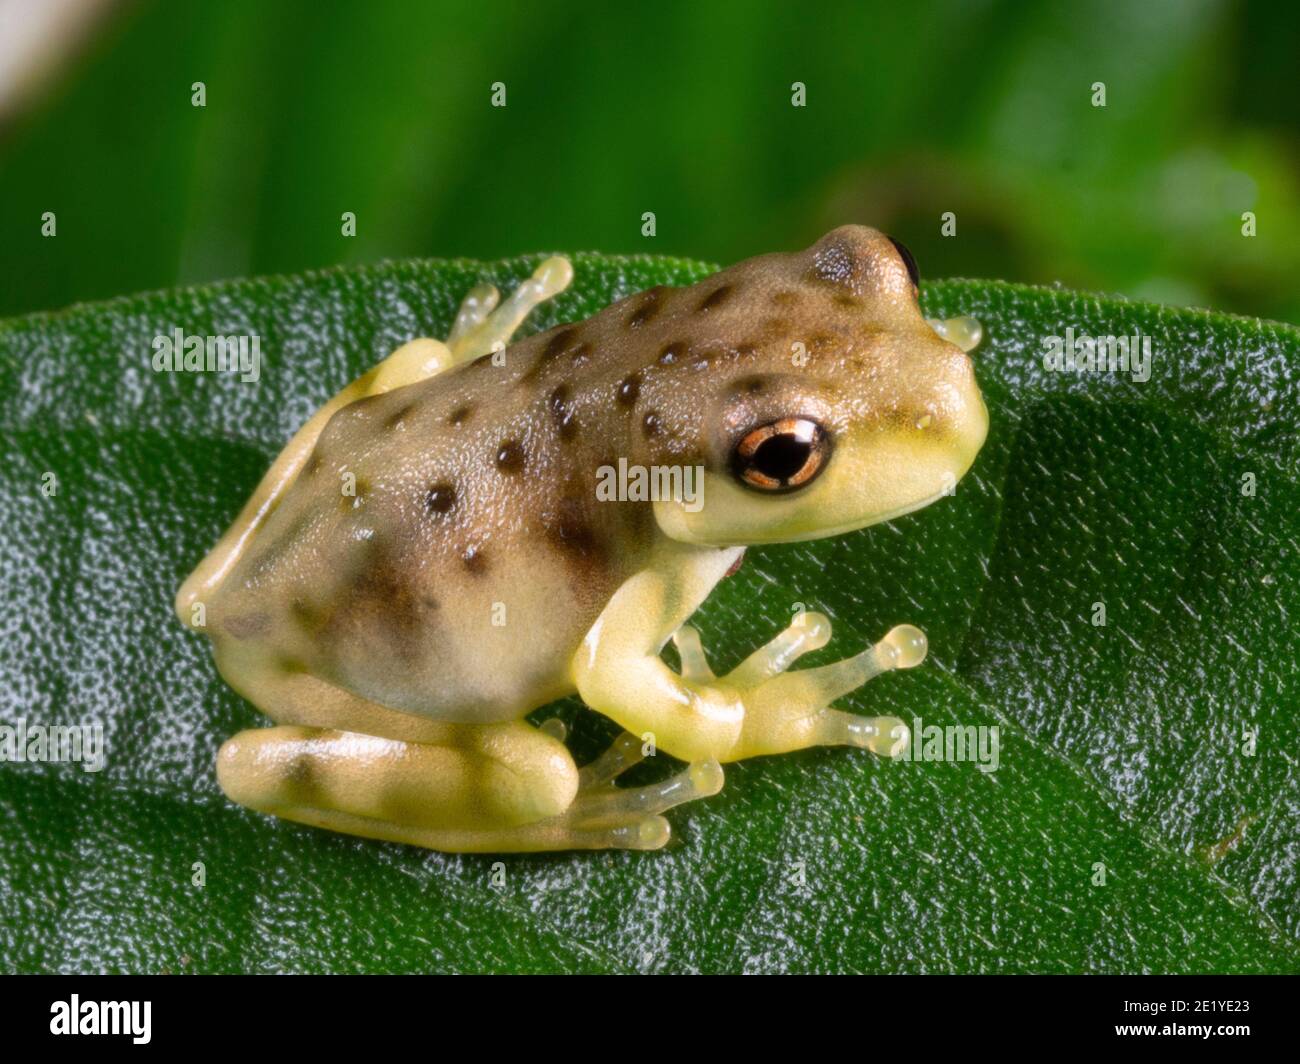 Page 2 - Metamorph High Resolution Stock Photography and Images - Alamy